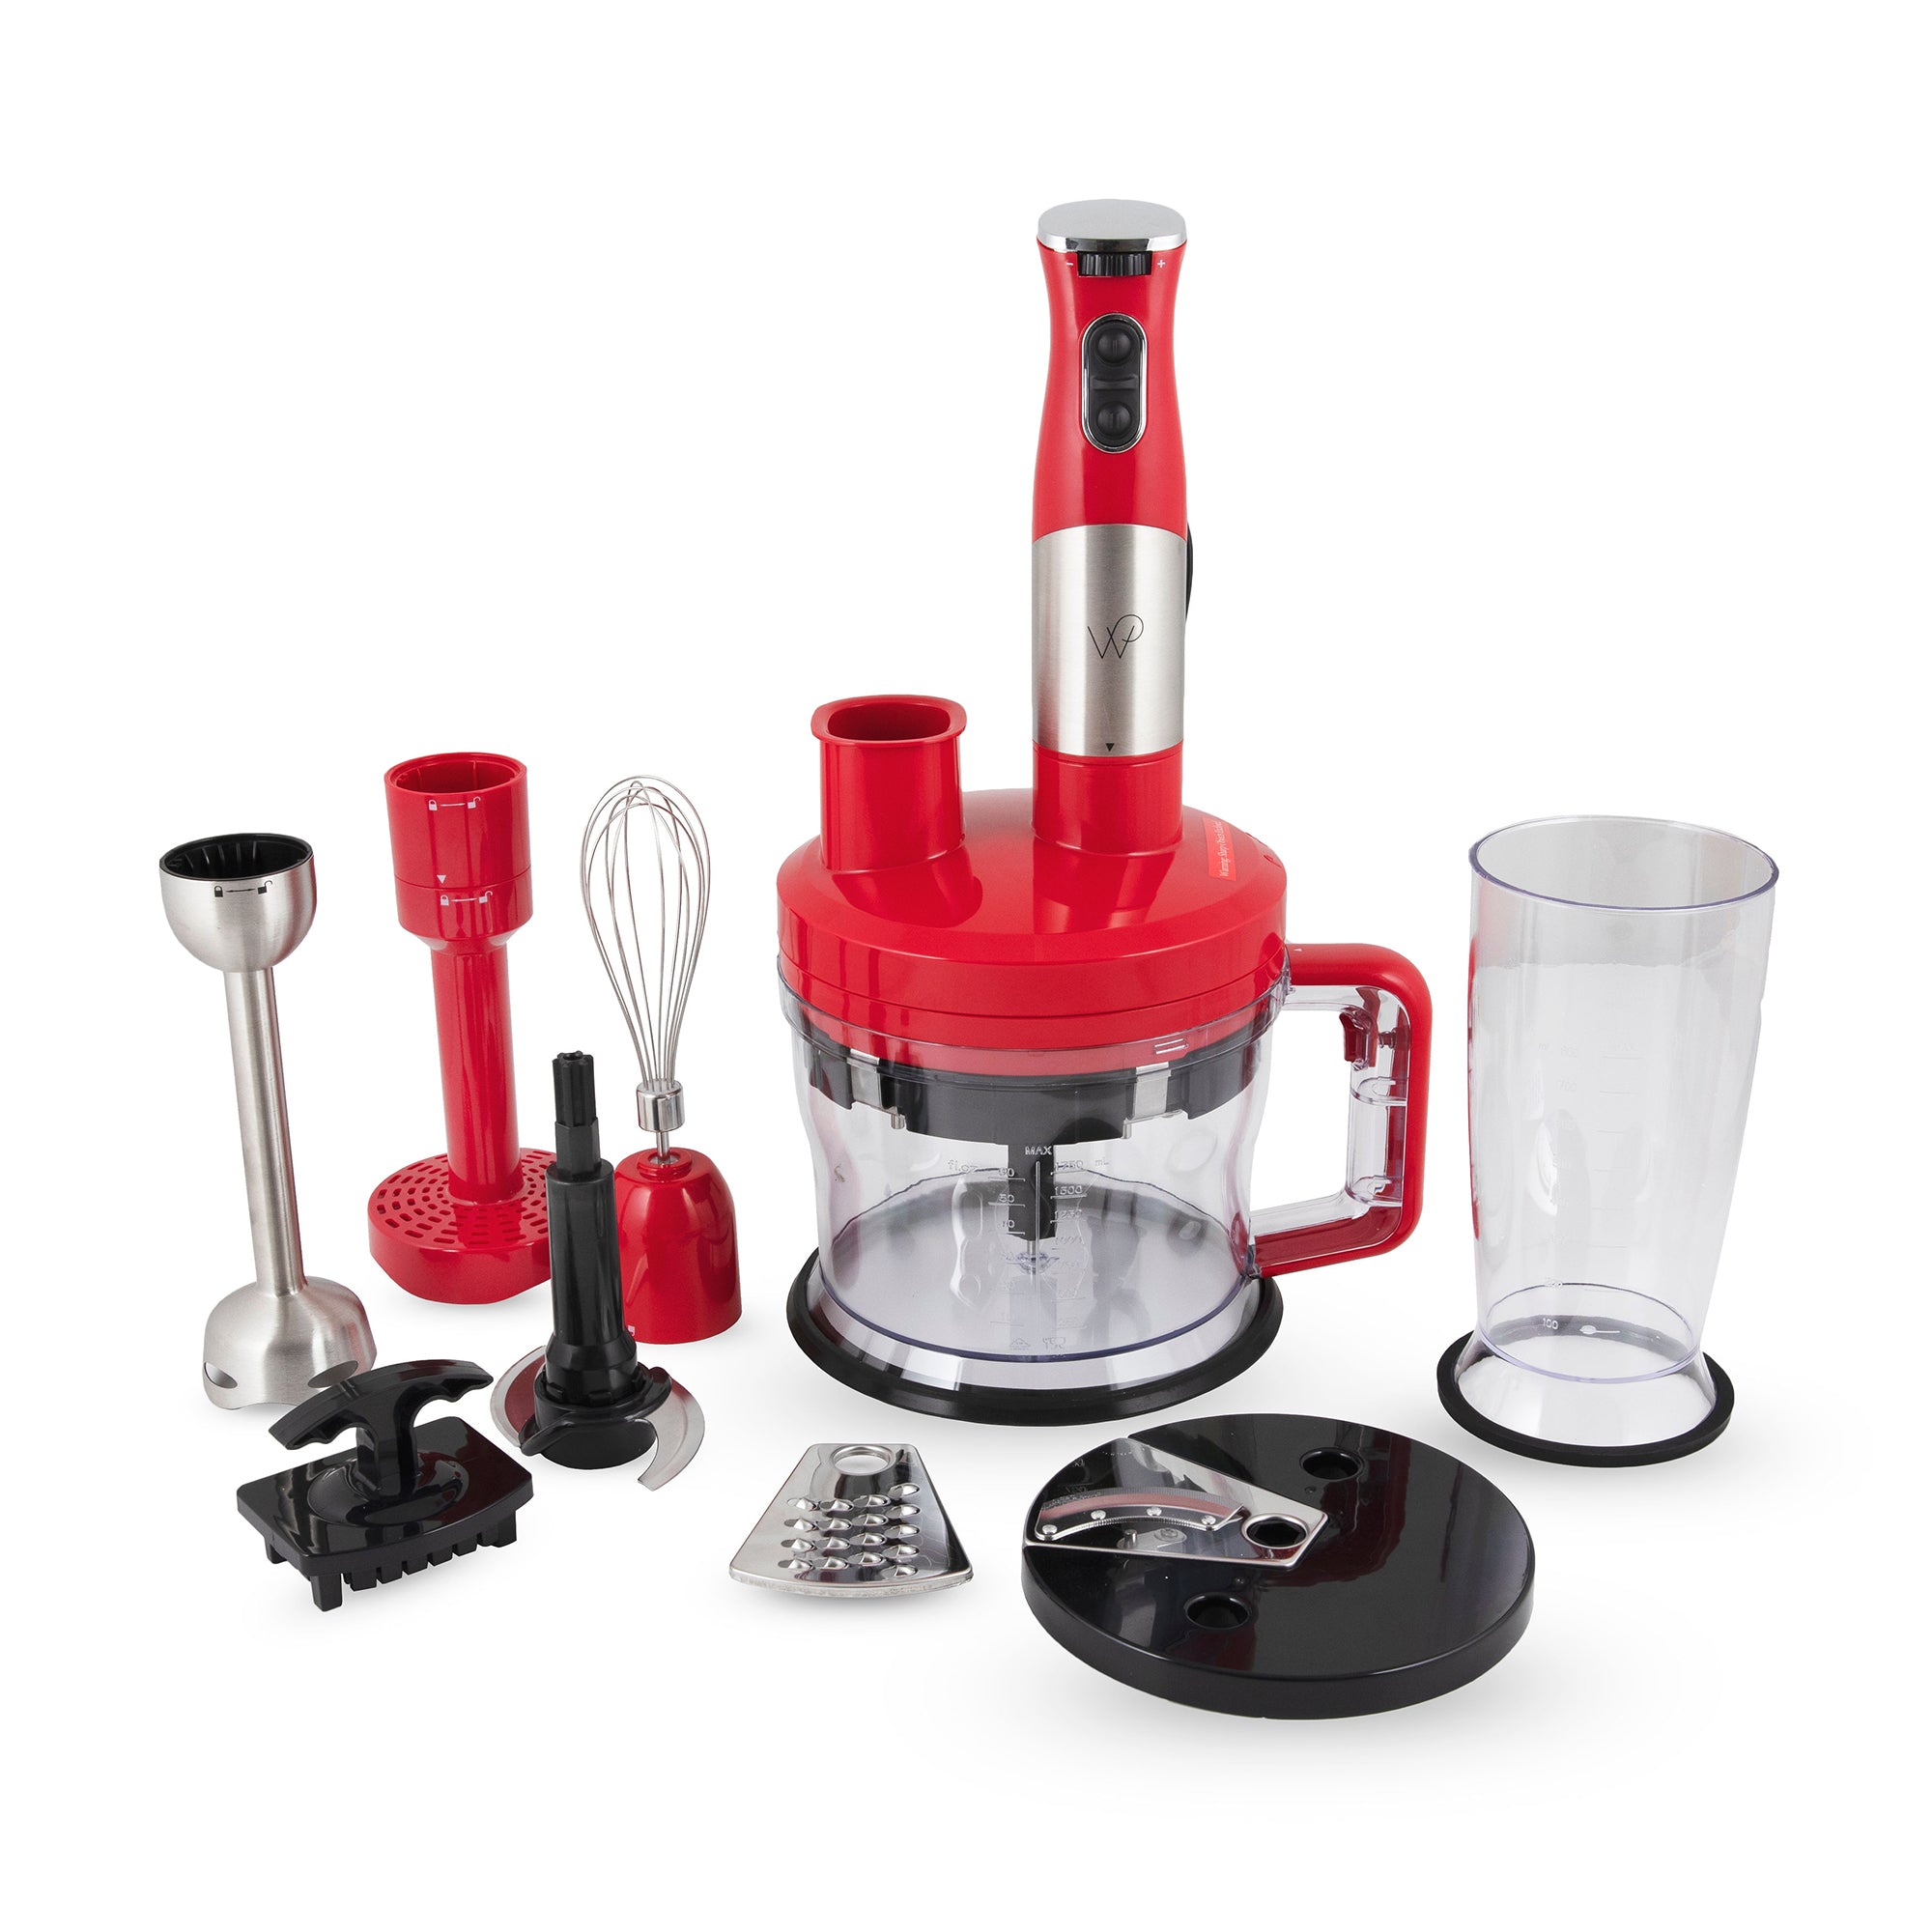 7-in-1 immersion blender in red by Wolfgang Puck